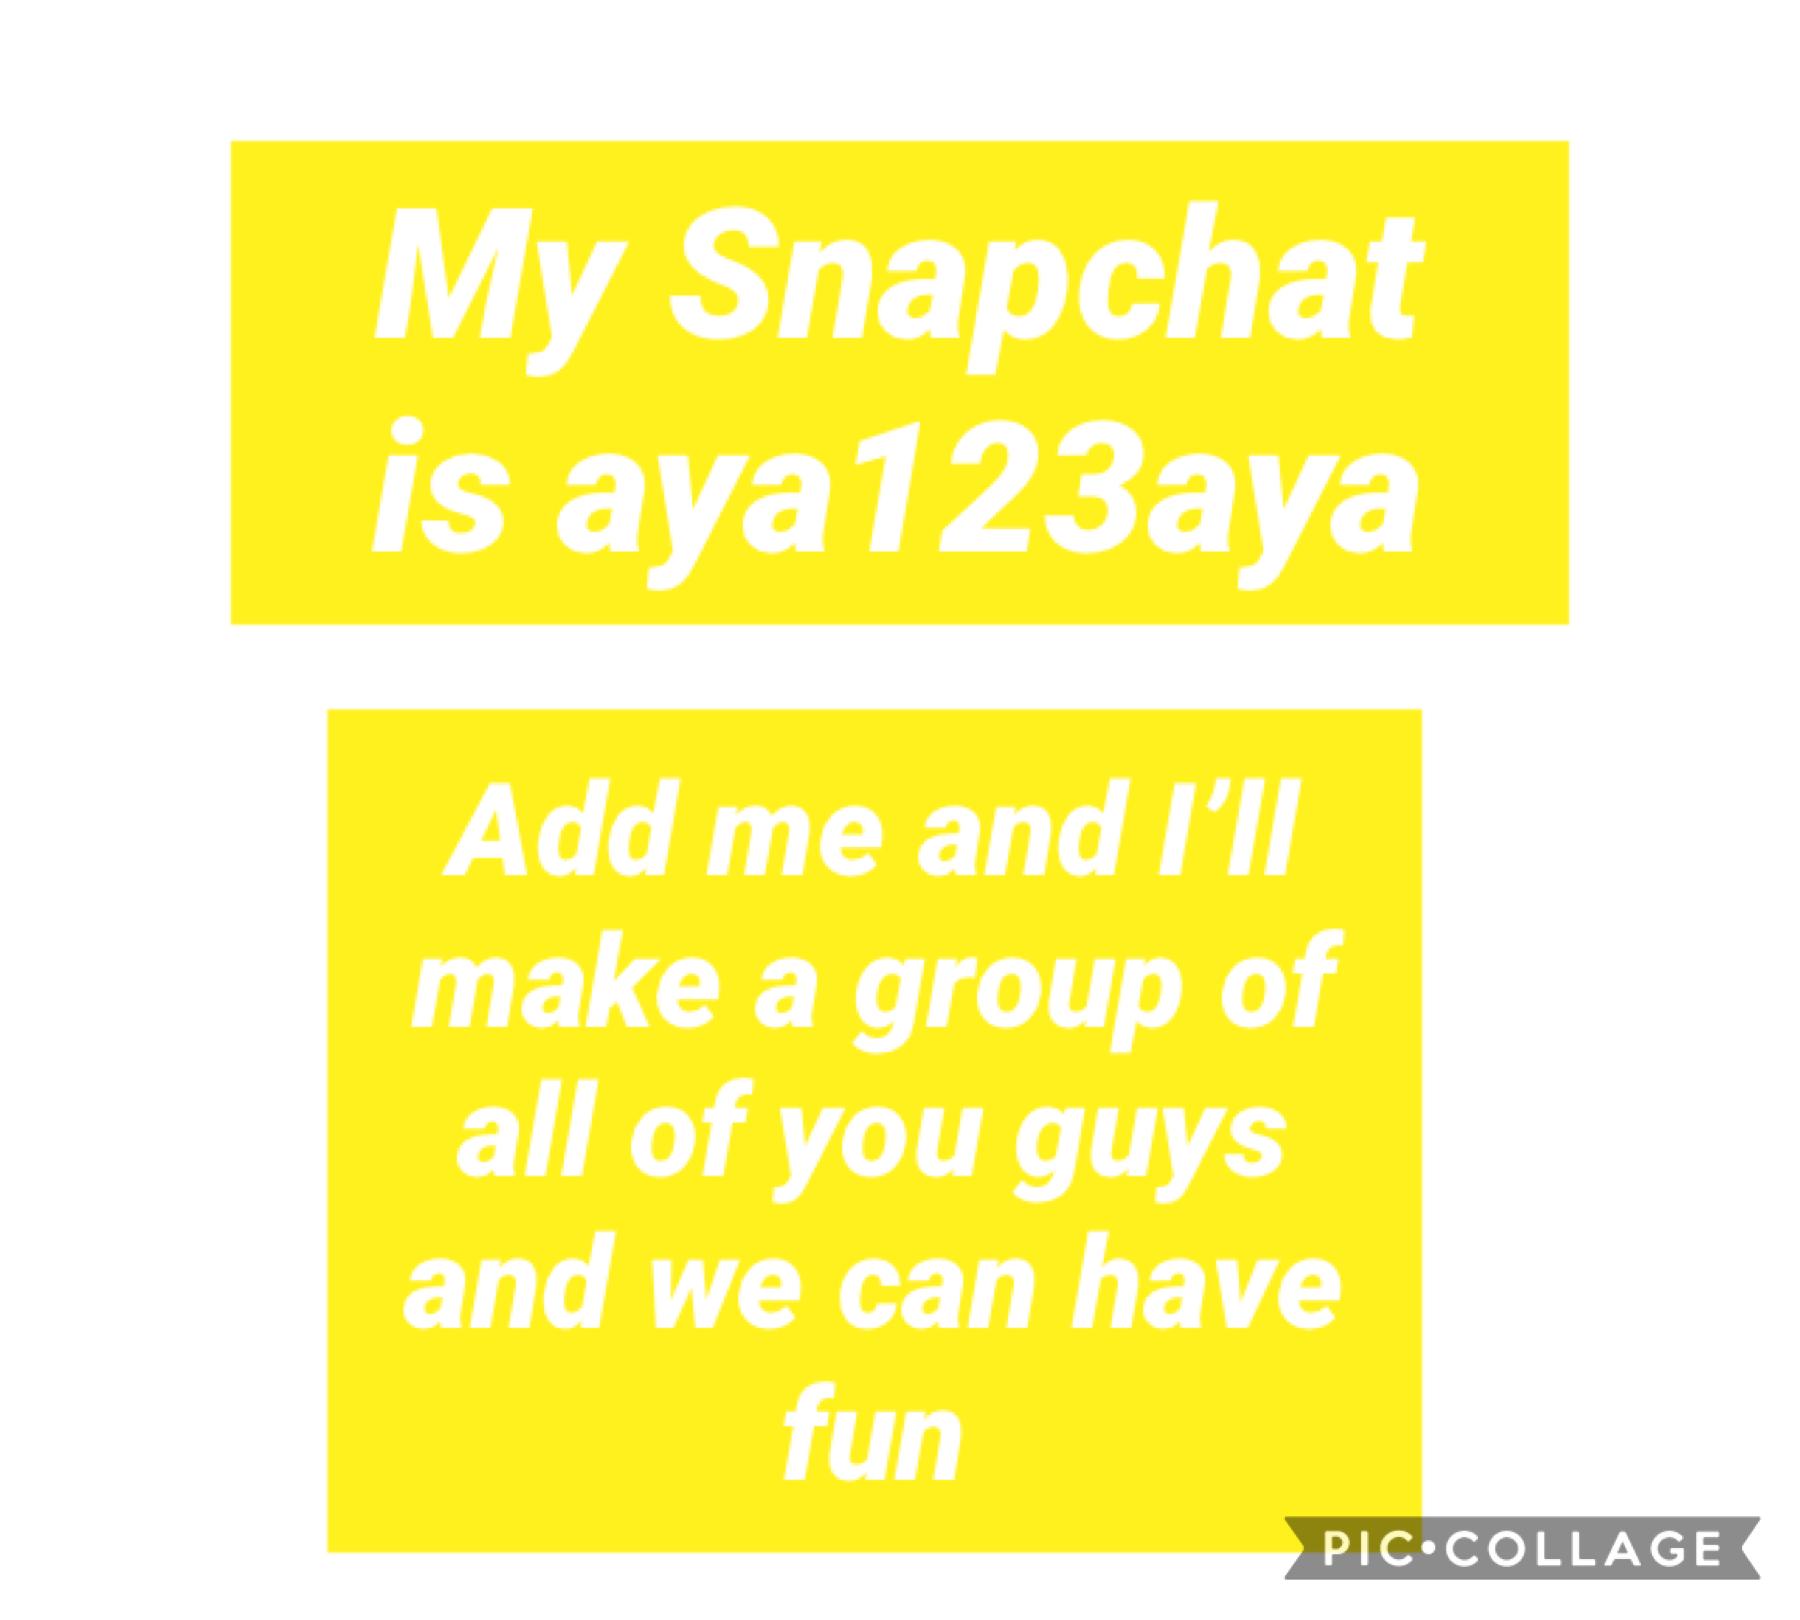 My Snapchat is aya123aya so go add me and we can chat together but please no cursing or being horrible have fun x